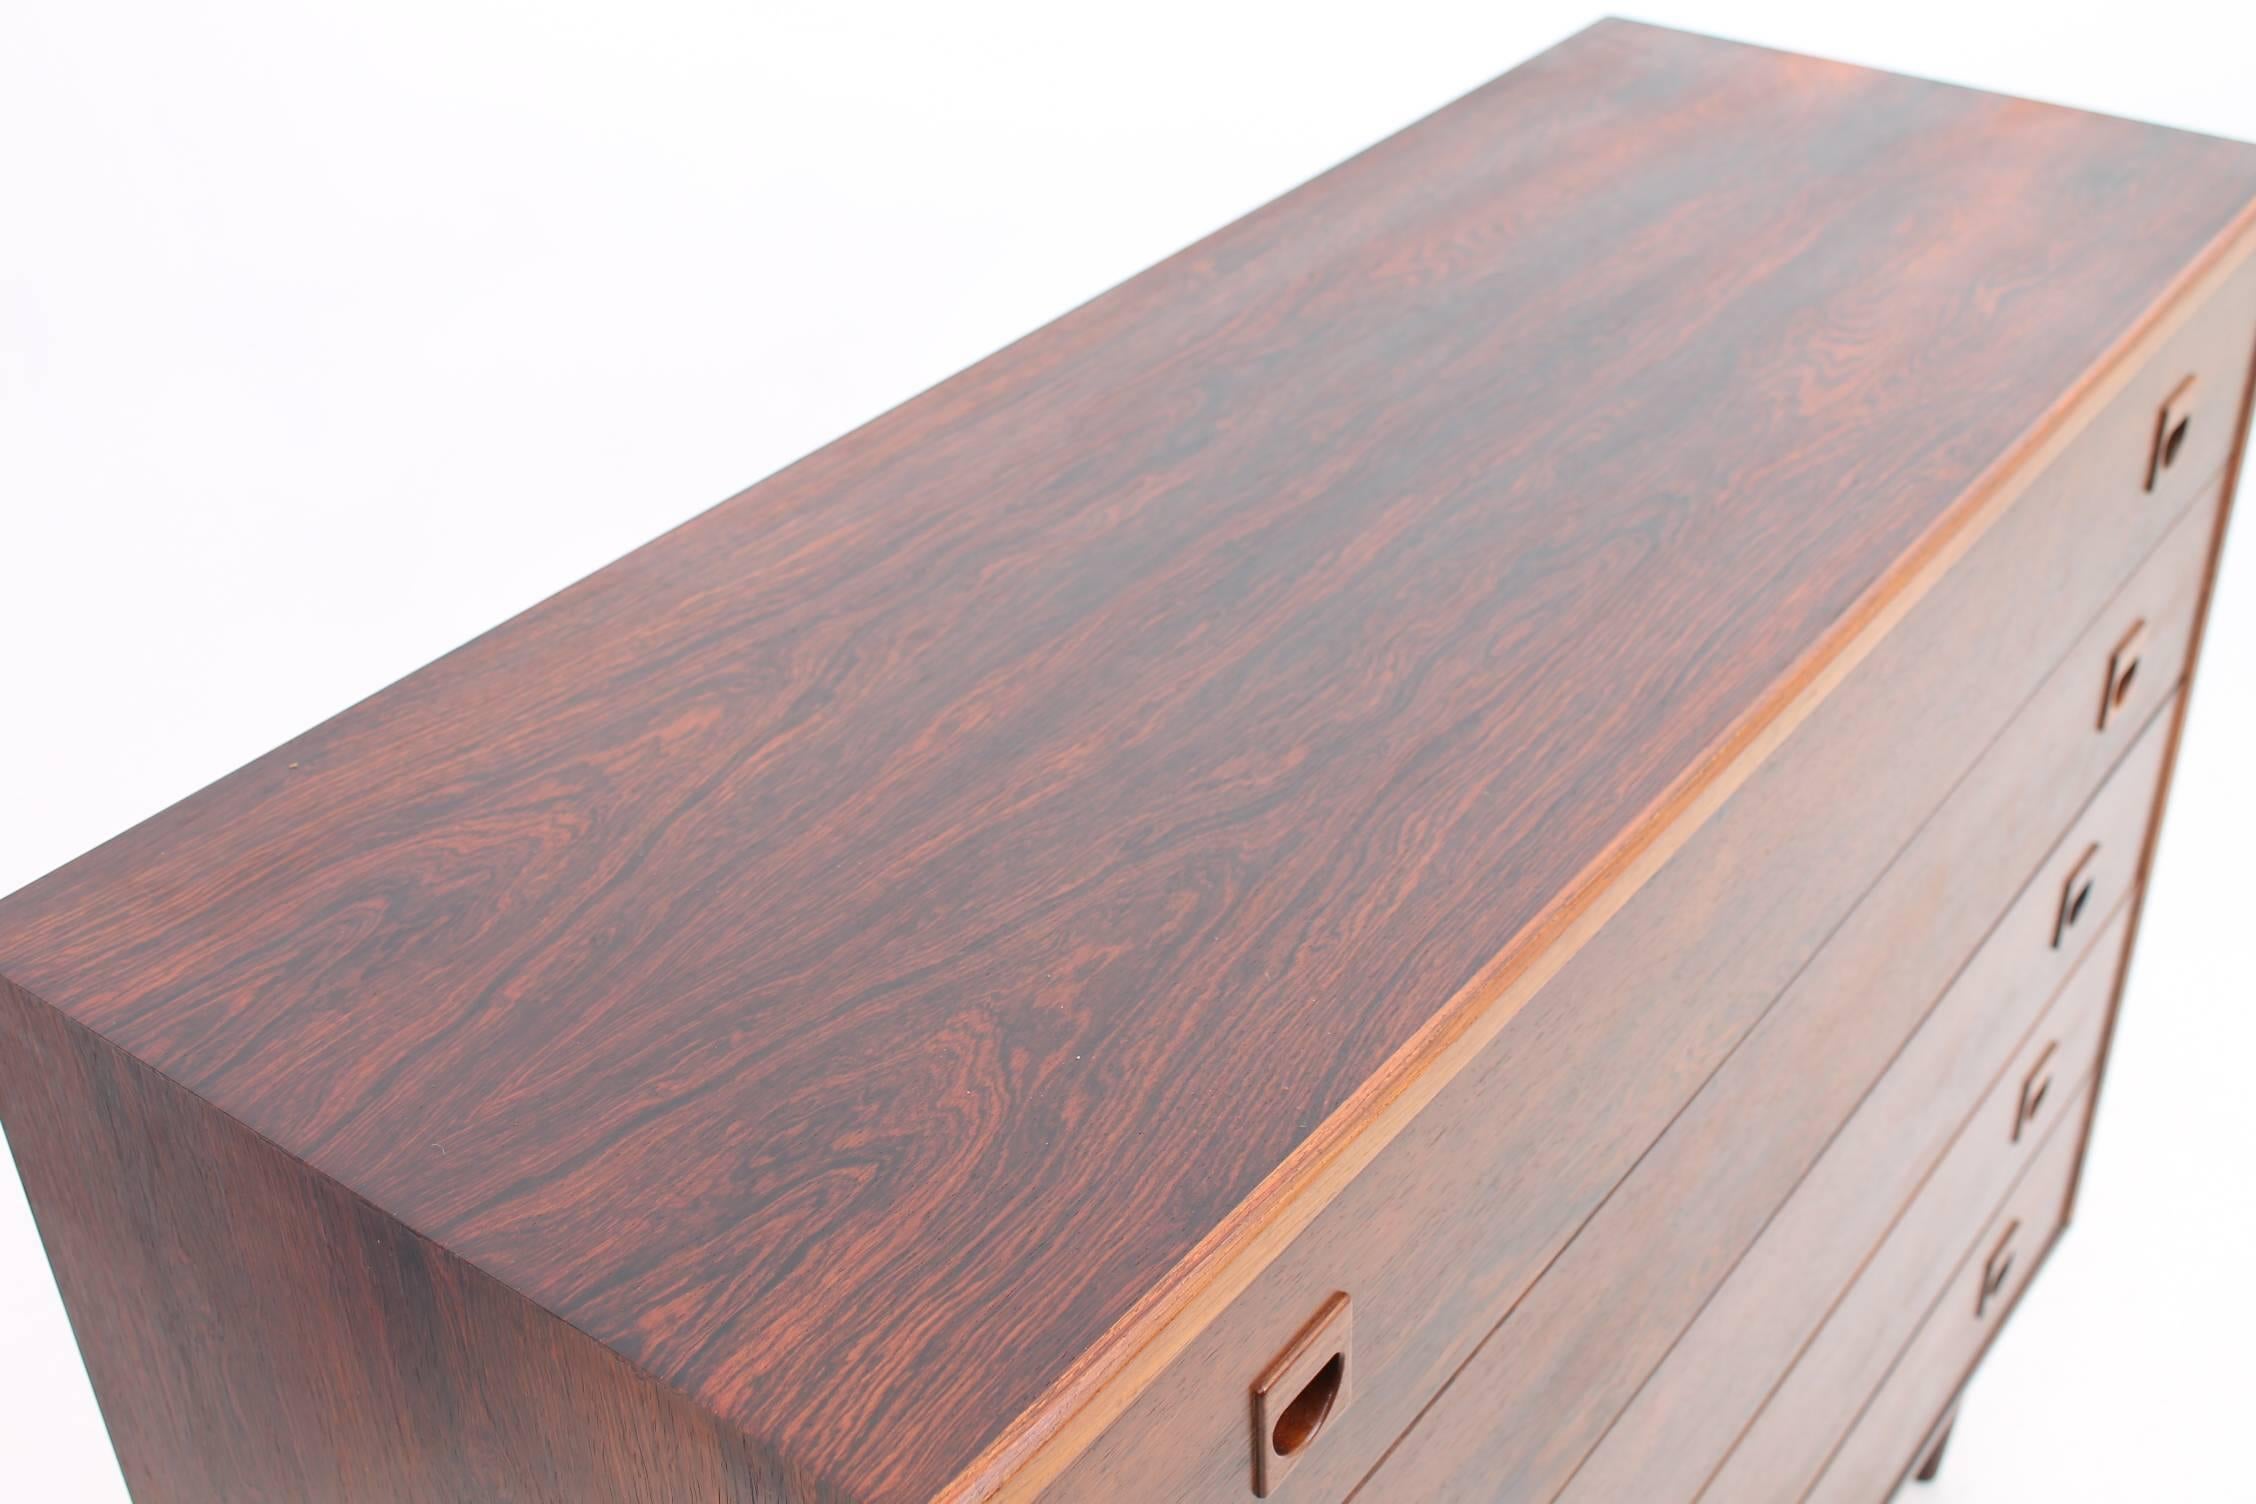 Scandinavian Modern Rosewood Chest of Drawers by Brouer Møbelfabrik - Large Size For Sale